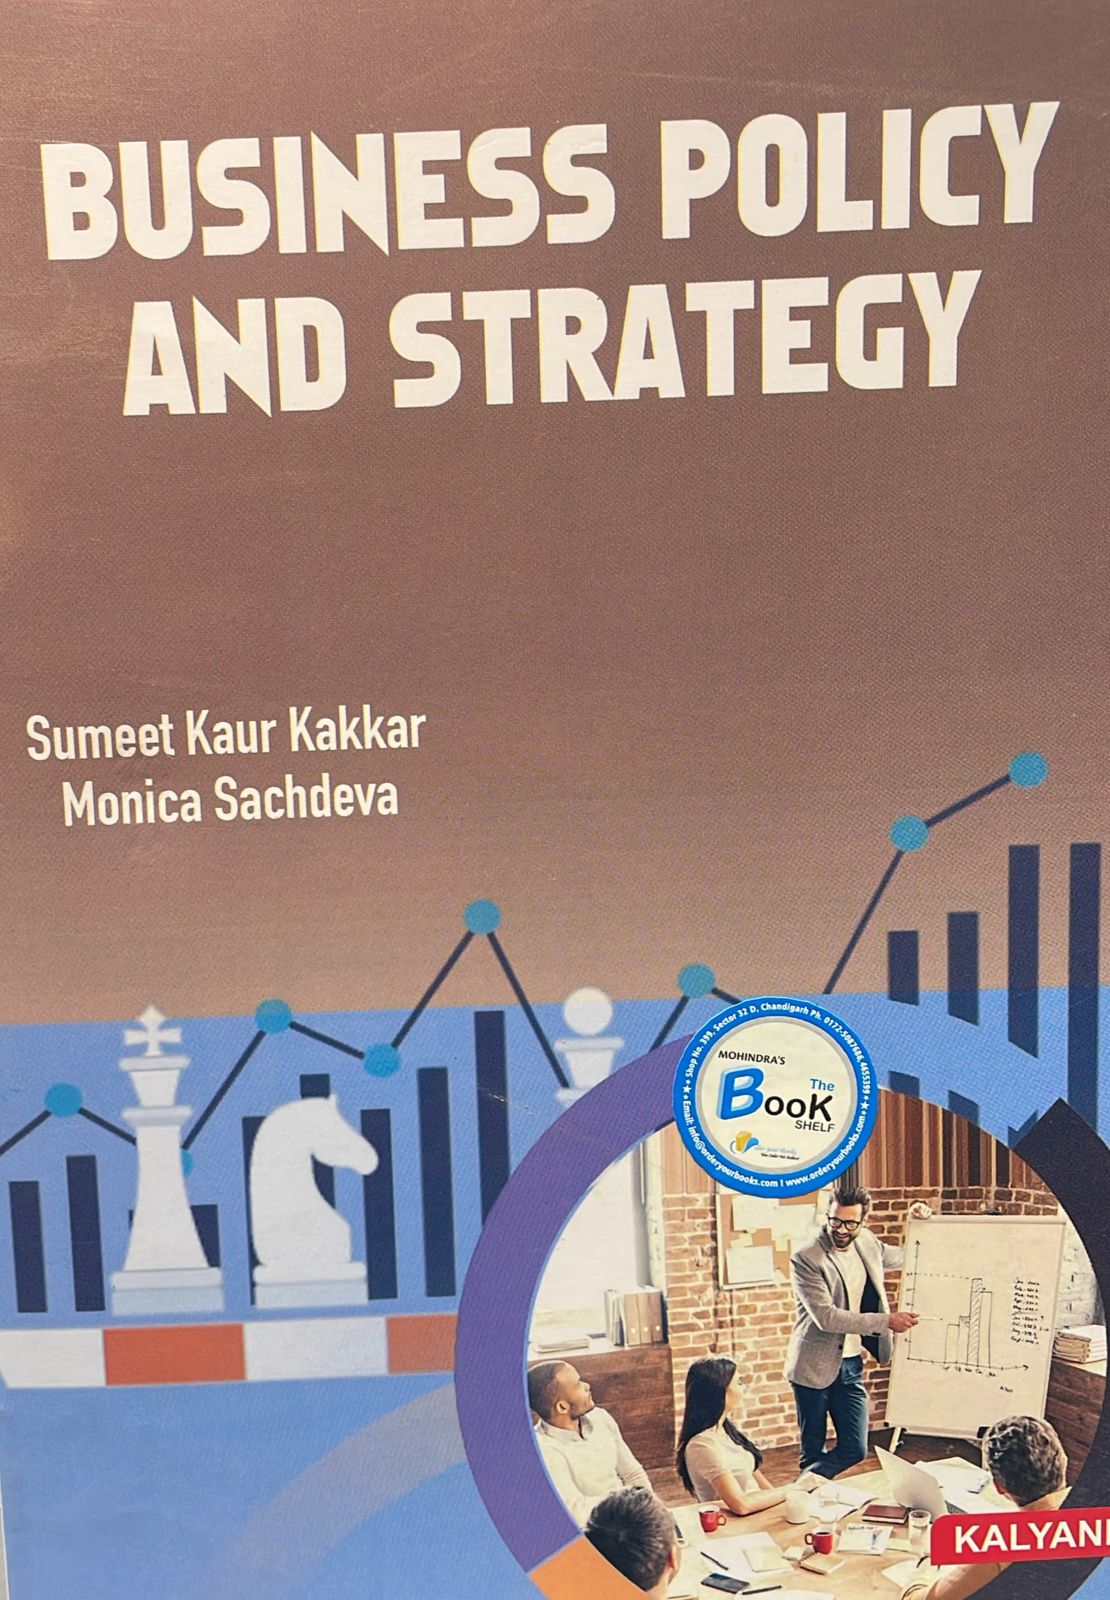 Kalyani Business policy and strategic management for BBA. 6th Sem., (P.U.) by Sumeet/Monica